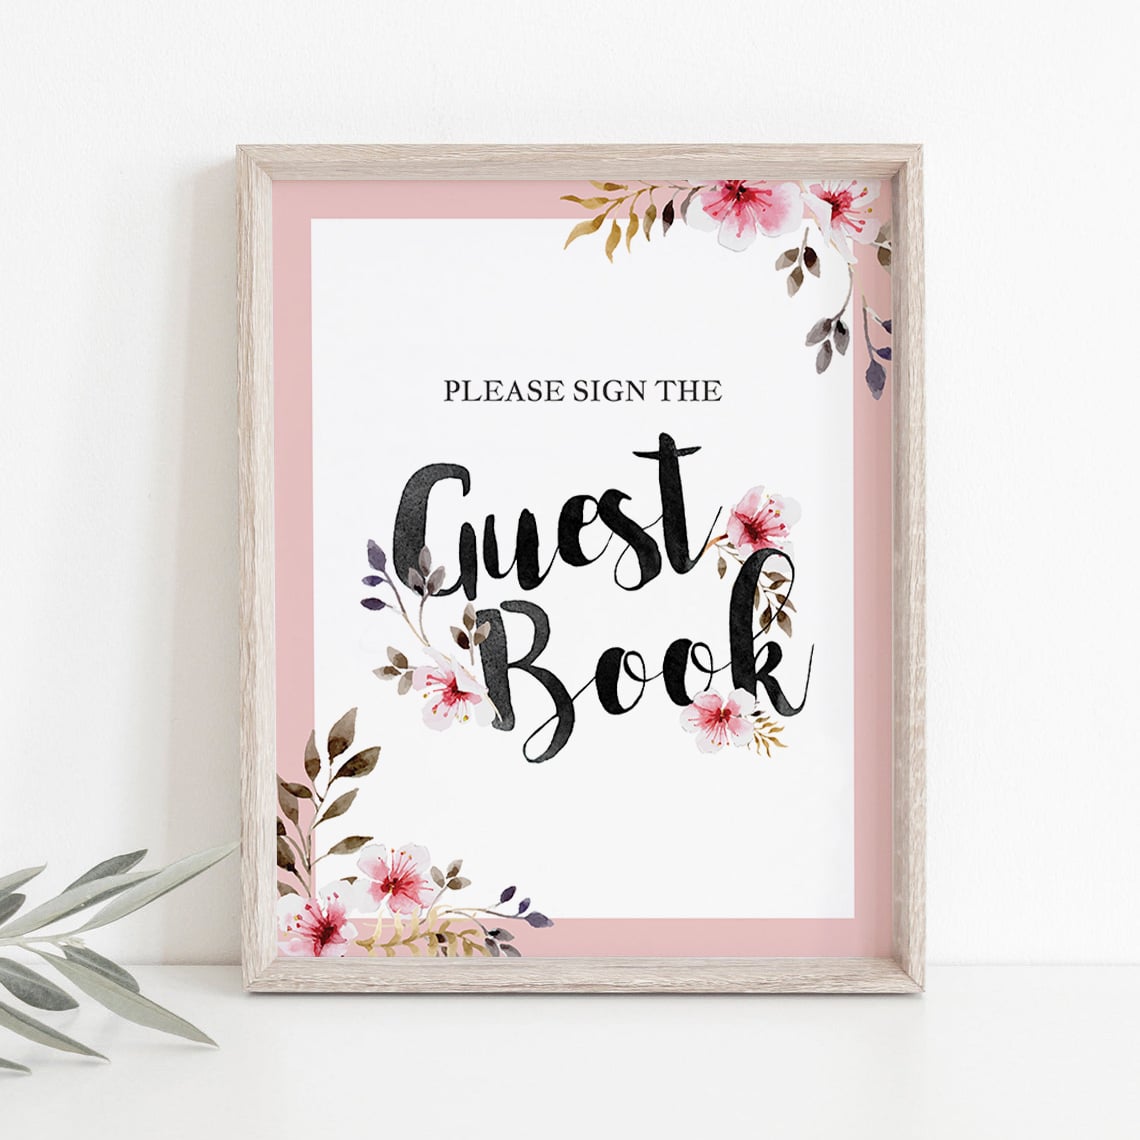 Please sign the guest book sign pink flowers by LittleSizzle